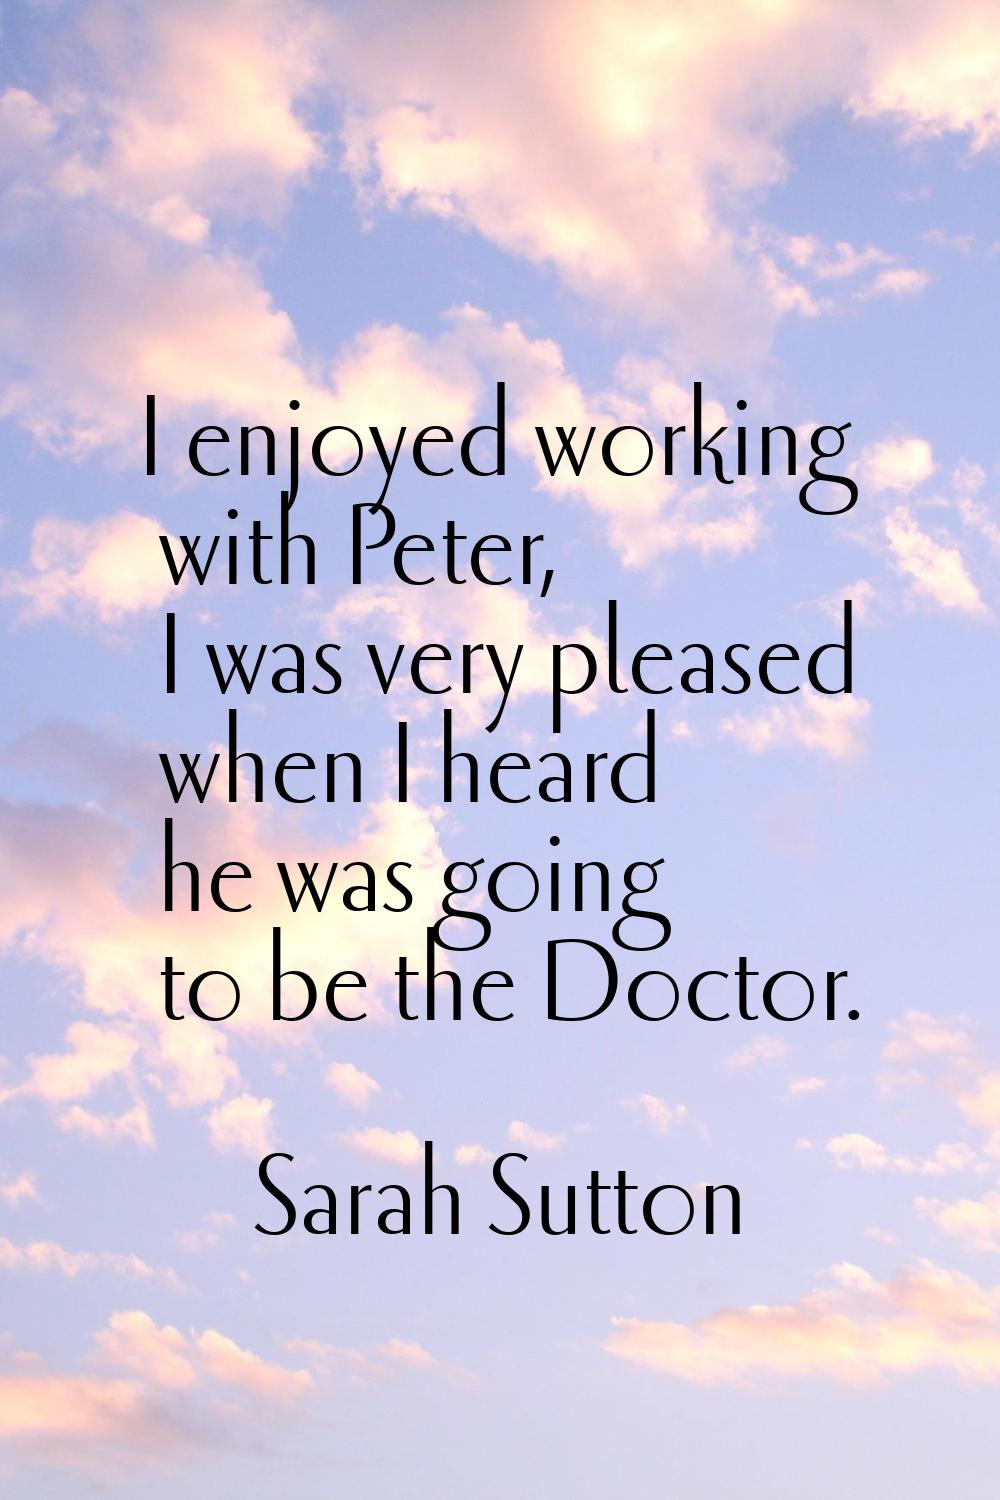 I enjoyed working with Peter, I was very pleased when I heard he was going to be the Doctor.